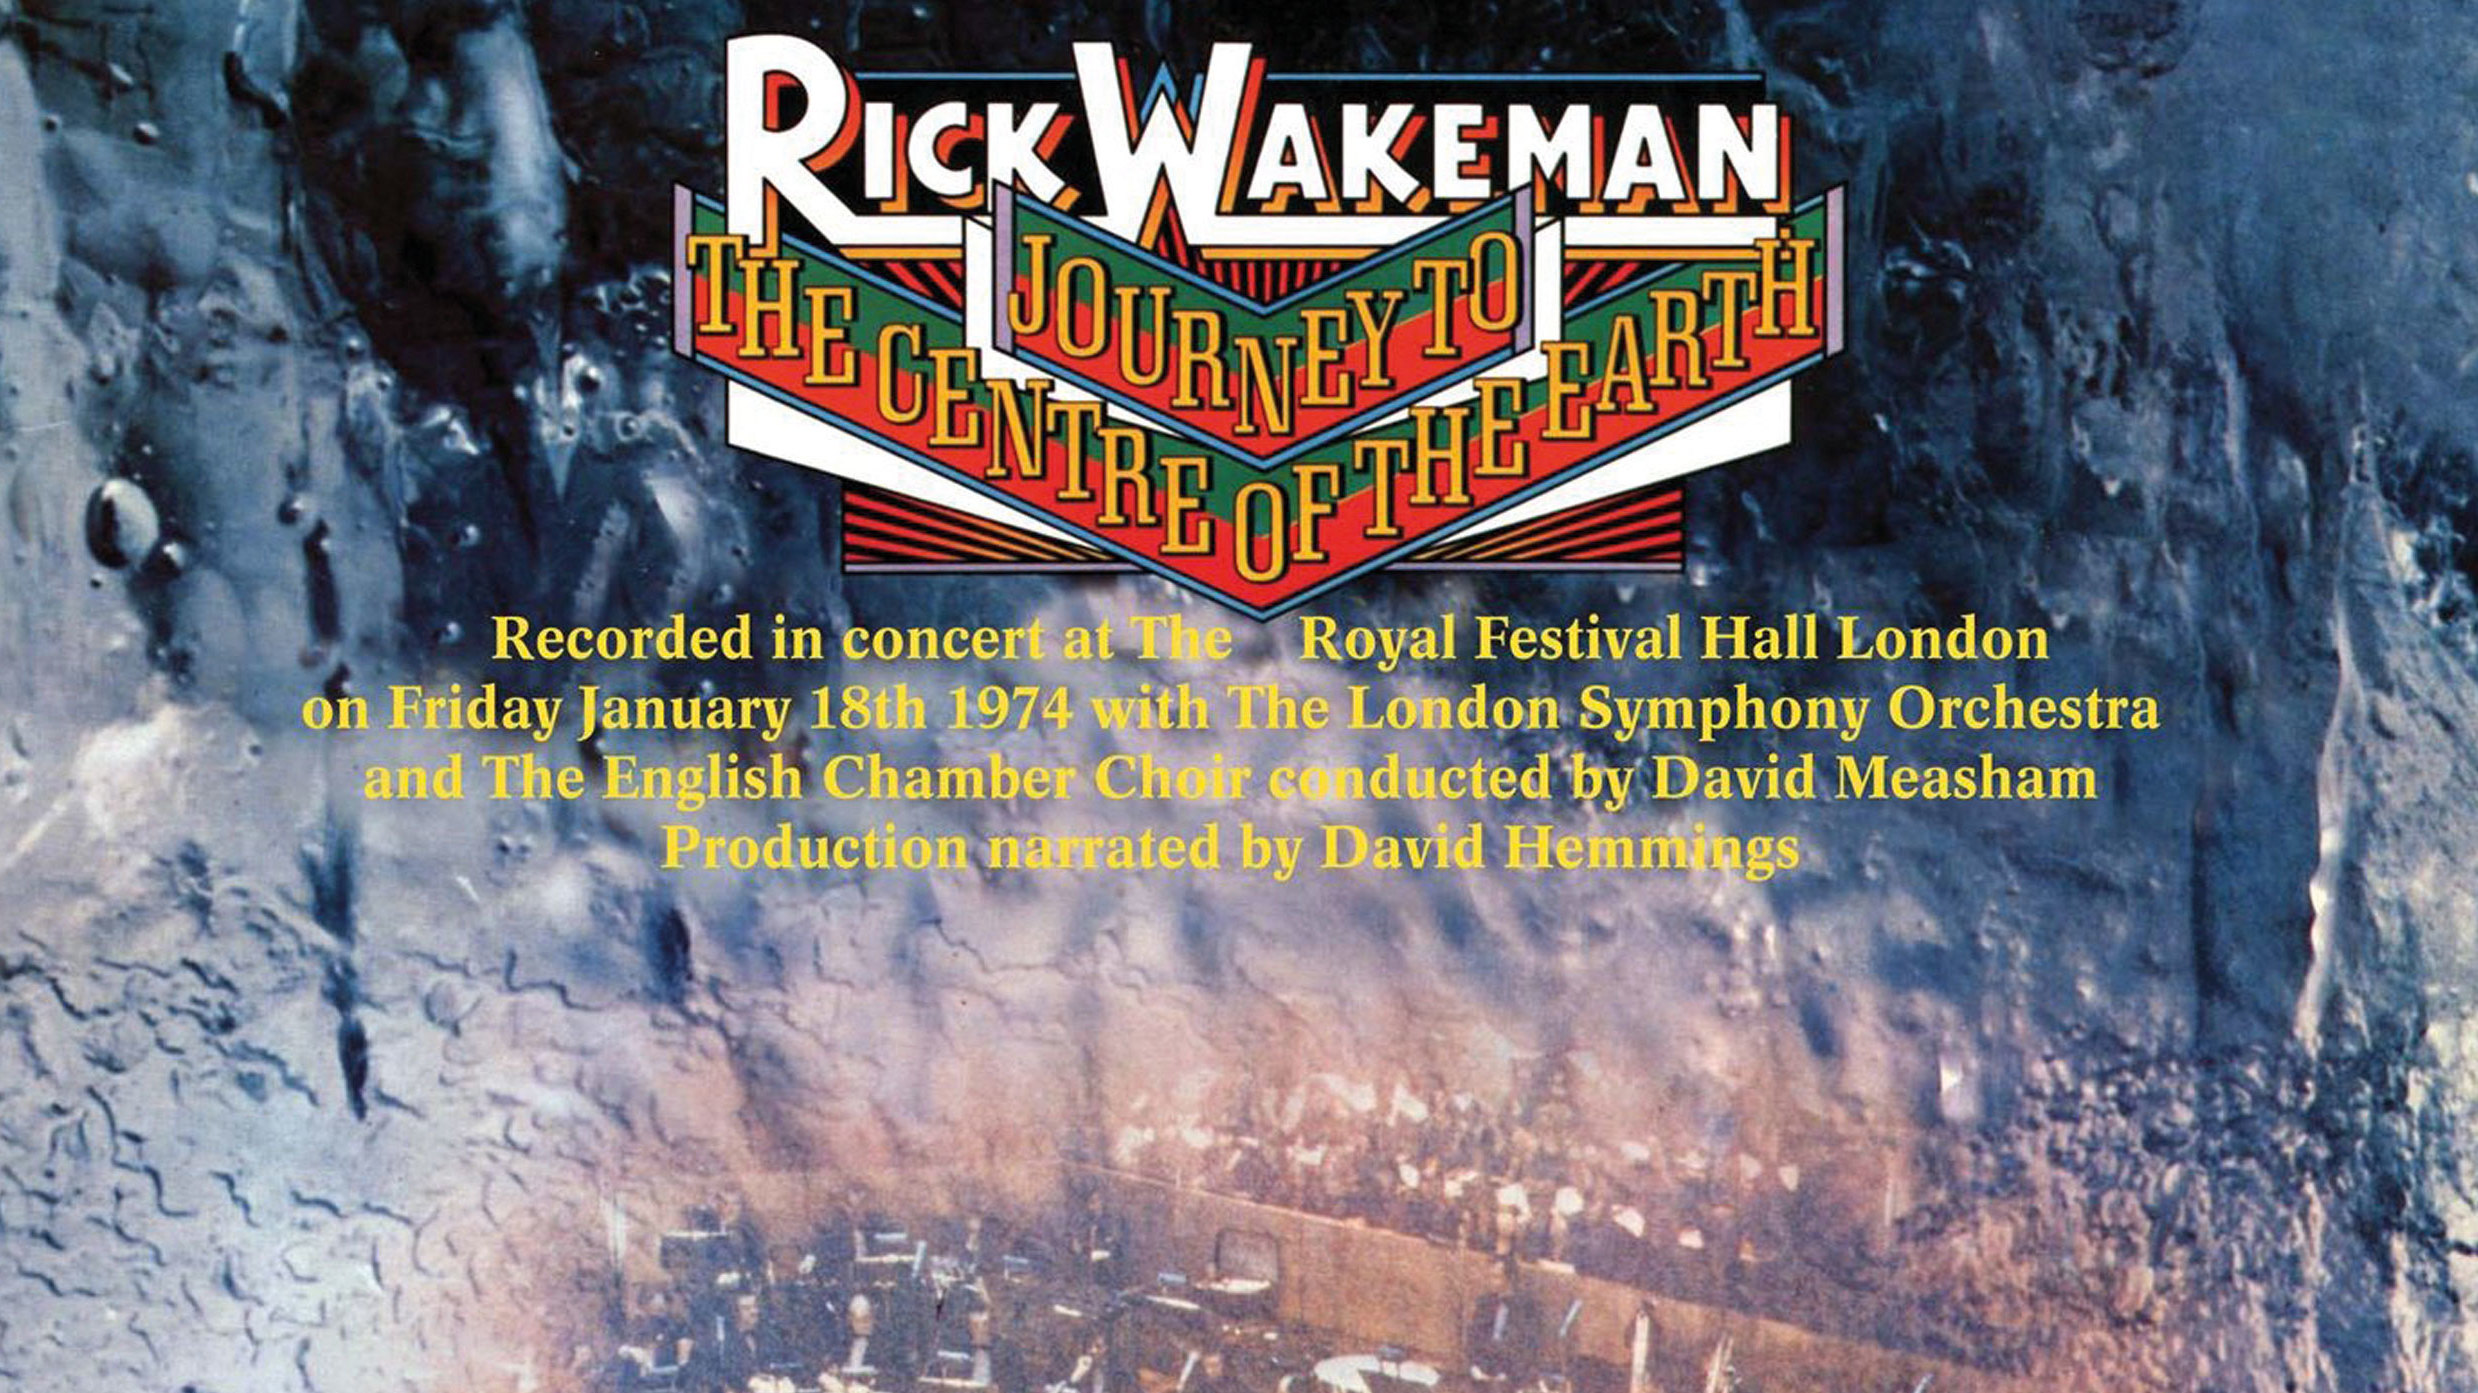 rick wakeman journey to the center of the earth tour